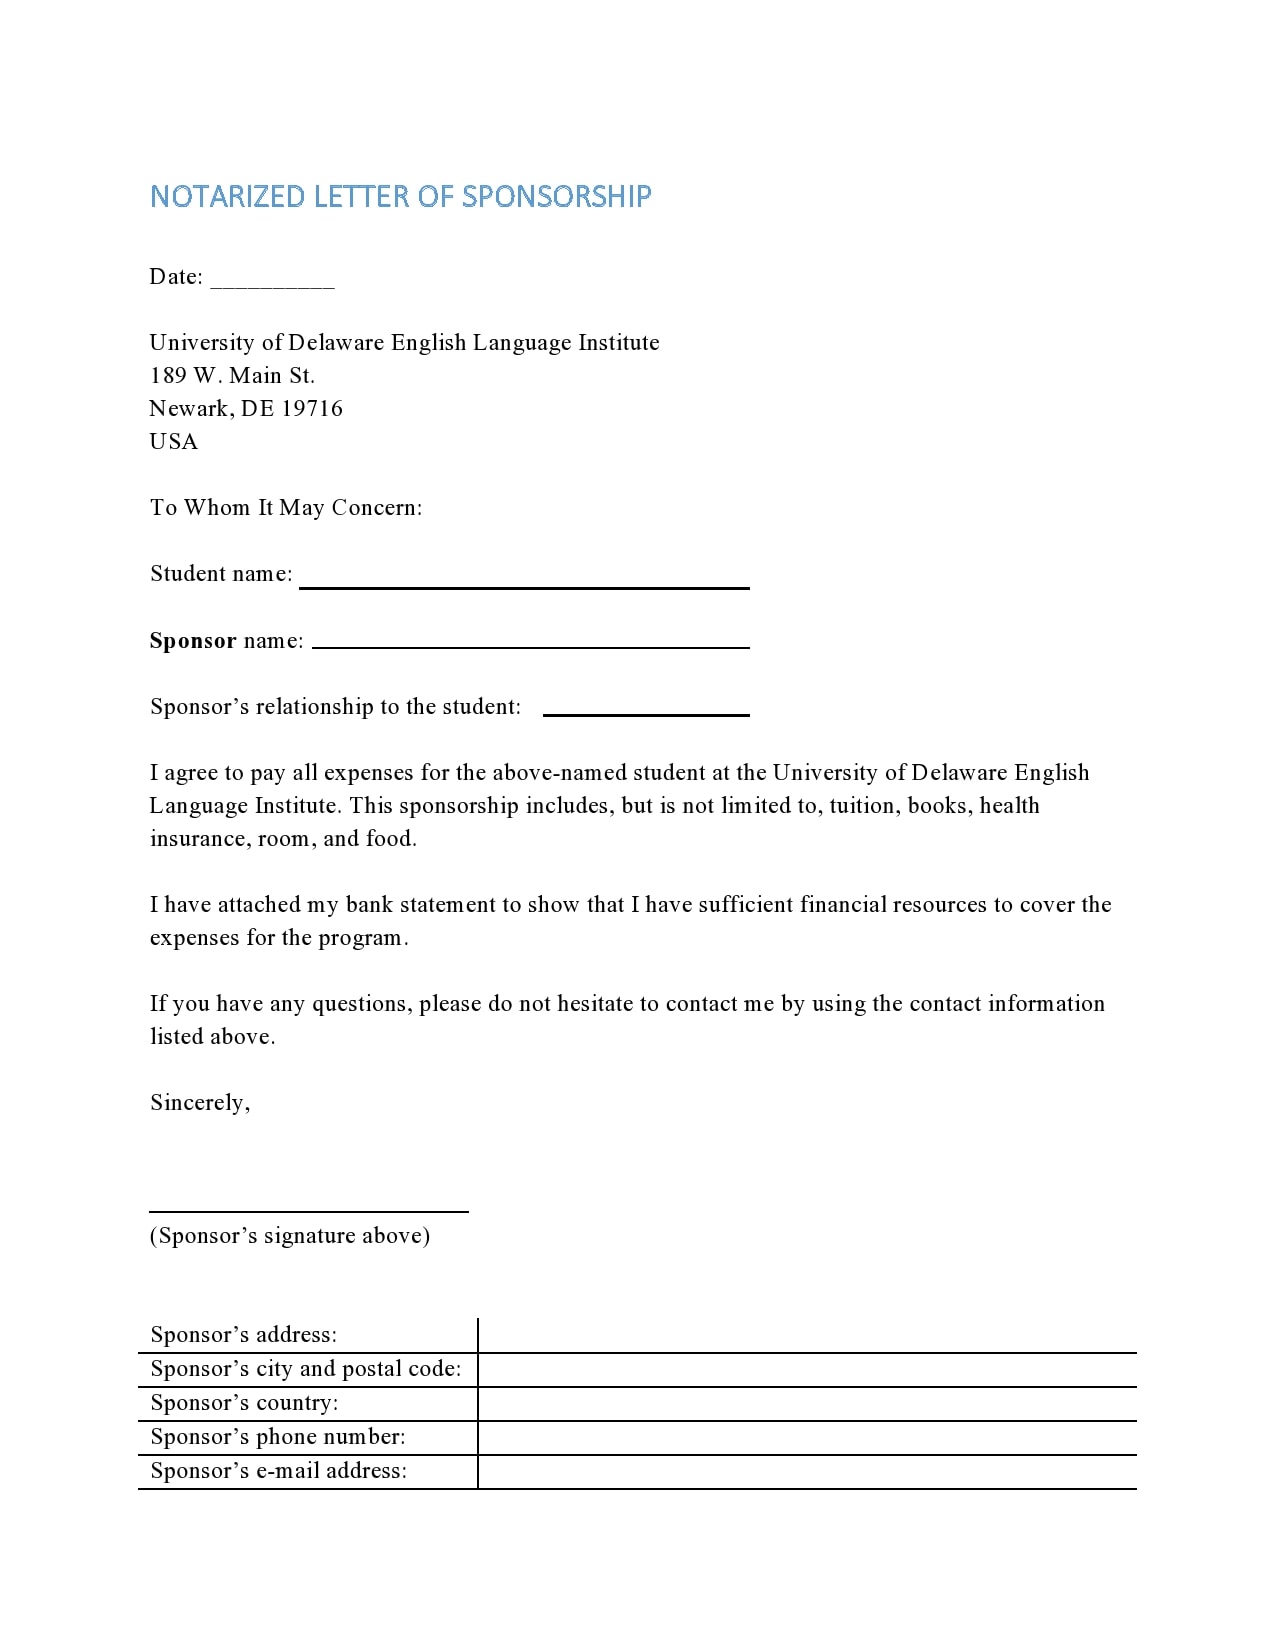 23 Free Notarized Letter Templates Notary Letters - TemplateArchive In notarized payment agreement template